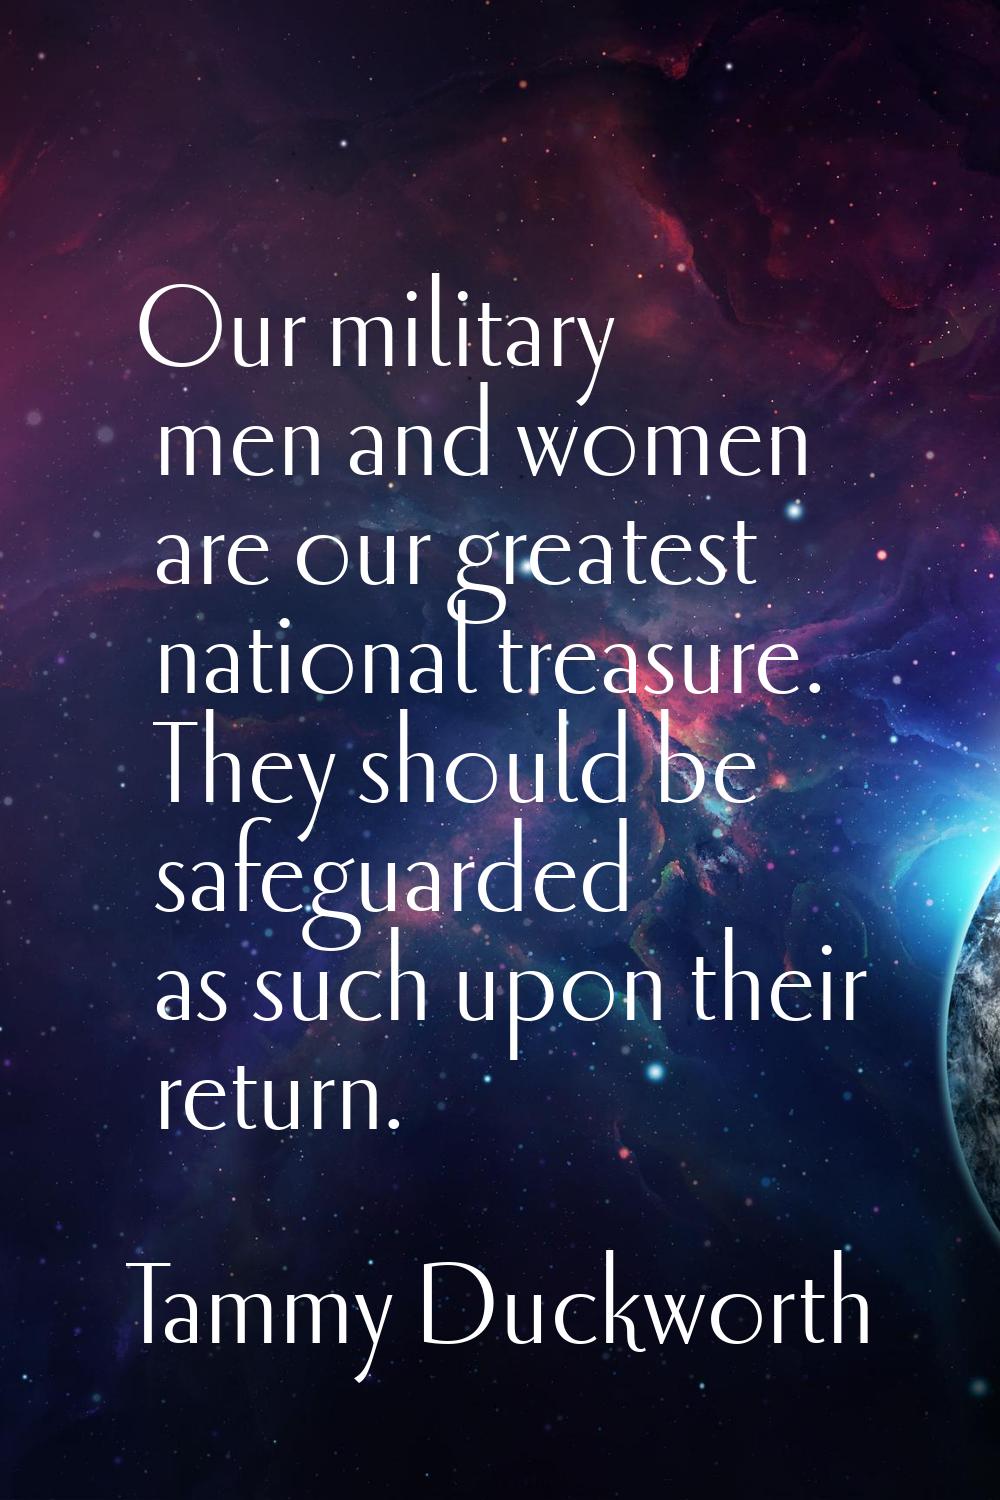 Our military men and women are our greatest national treasure. They should be safeguarded as such u